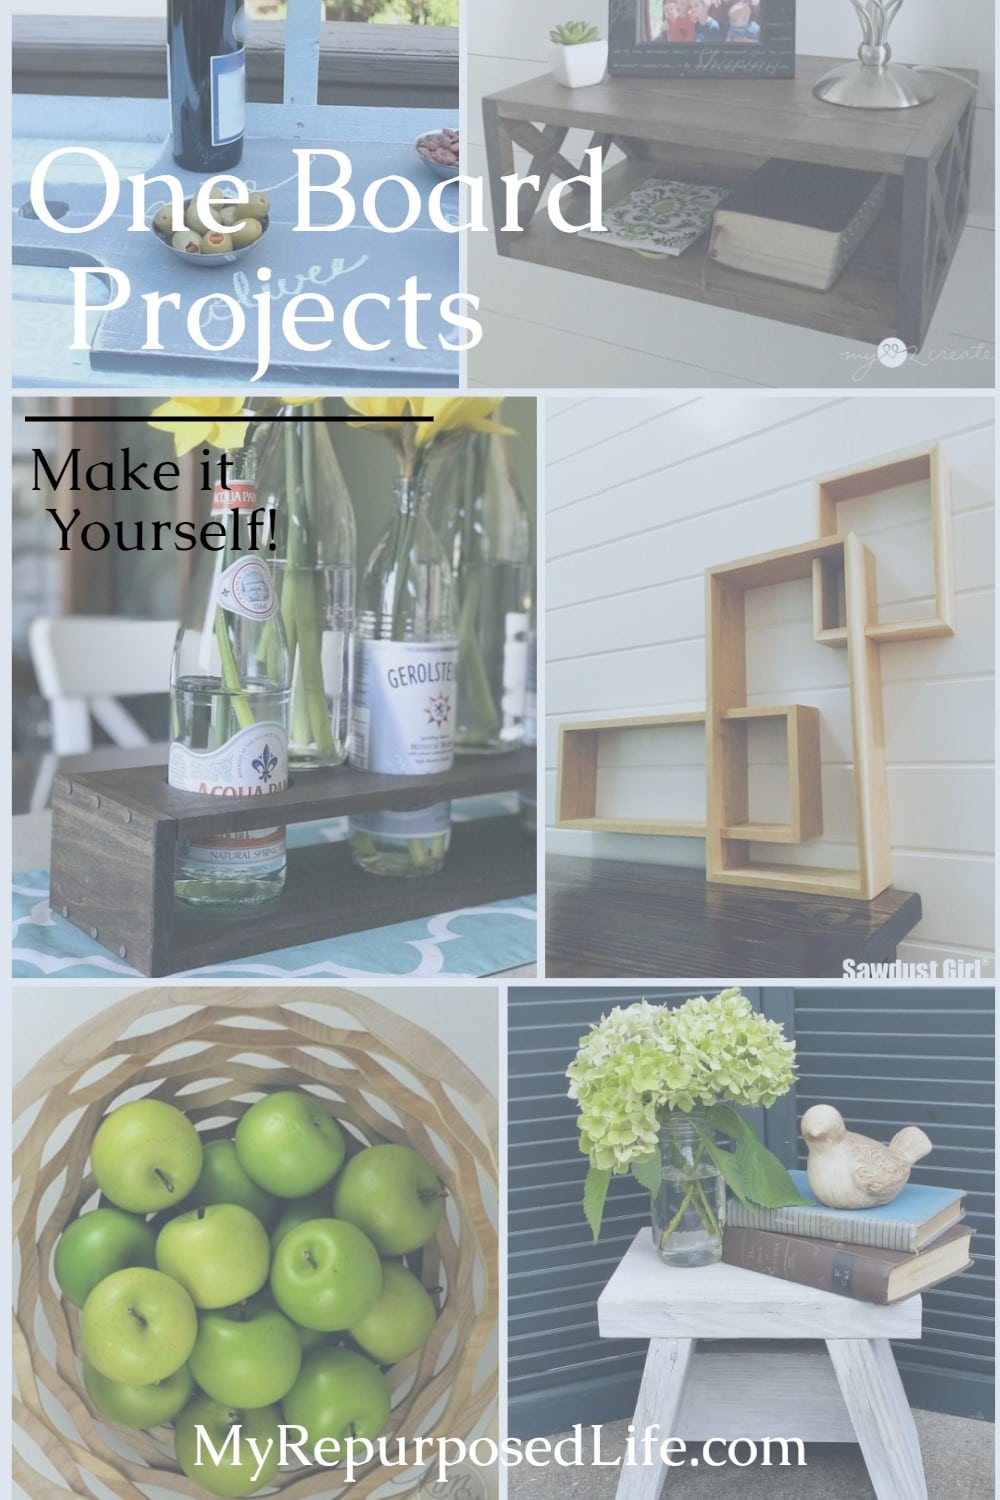 Here's a great collection of one board projects to inspire you to DIY. Ideas to make projects out of a single board. What will you make? #MyRepurposedLife #oneboard via @repurposedlife